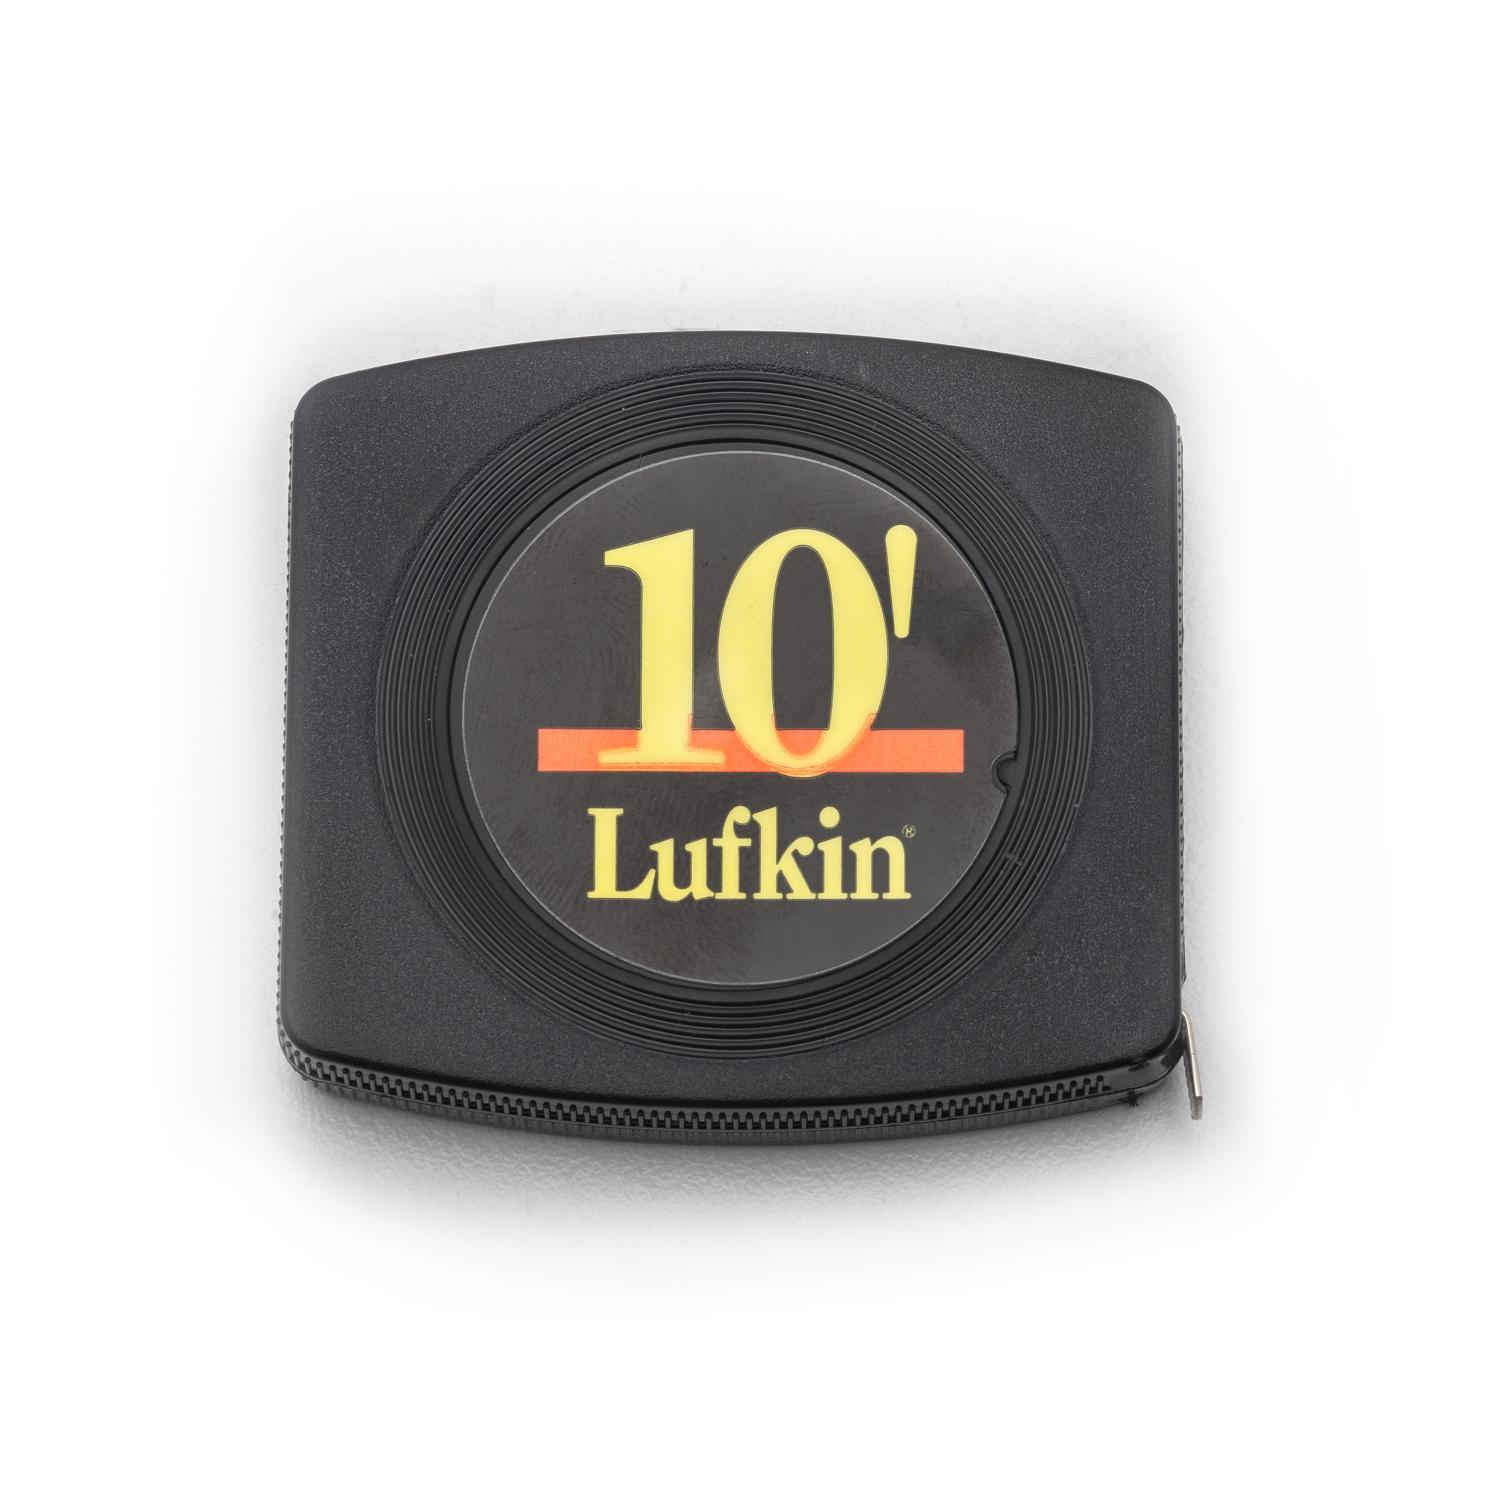 Photos - Tape Measure and Surveyor Tape Crescent Lufkin 10 ft. L X 0.25 in. W Handy Pocket Tape Measure 1 pk W6110 